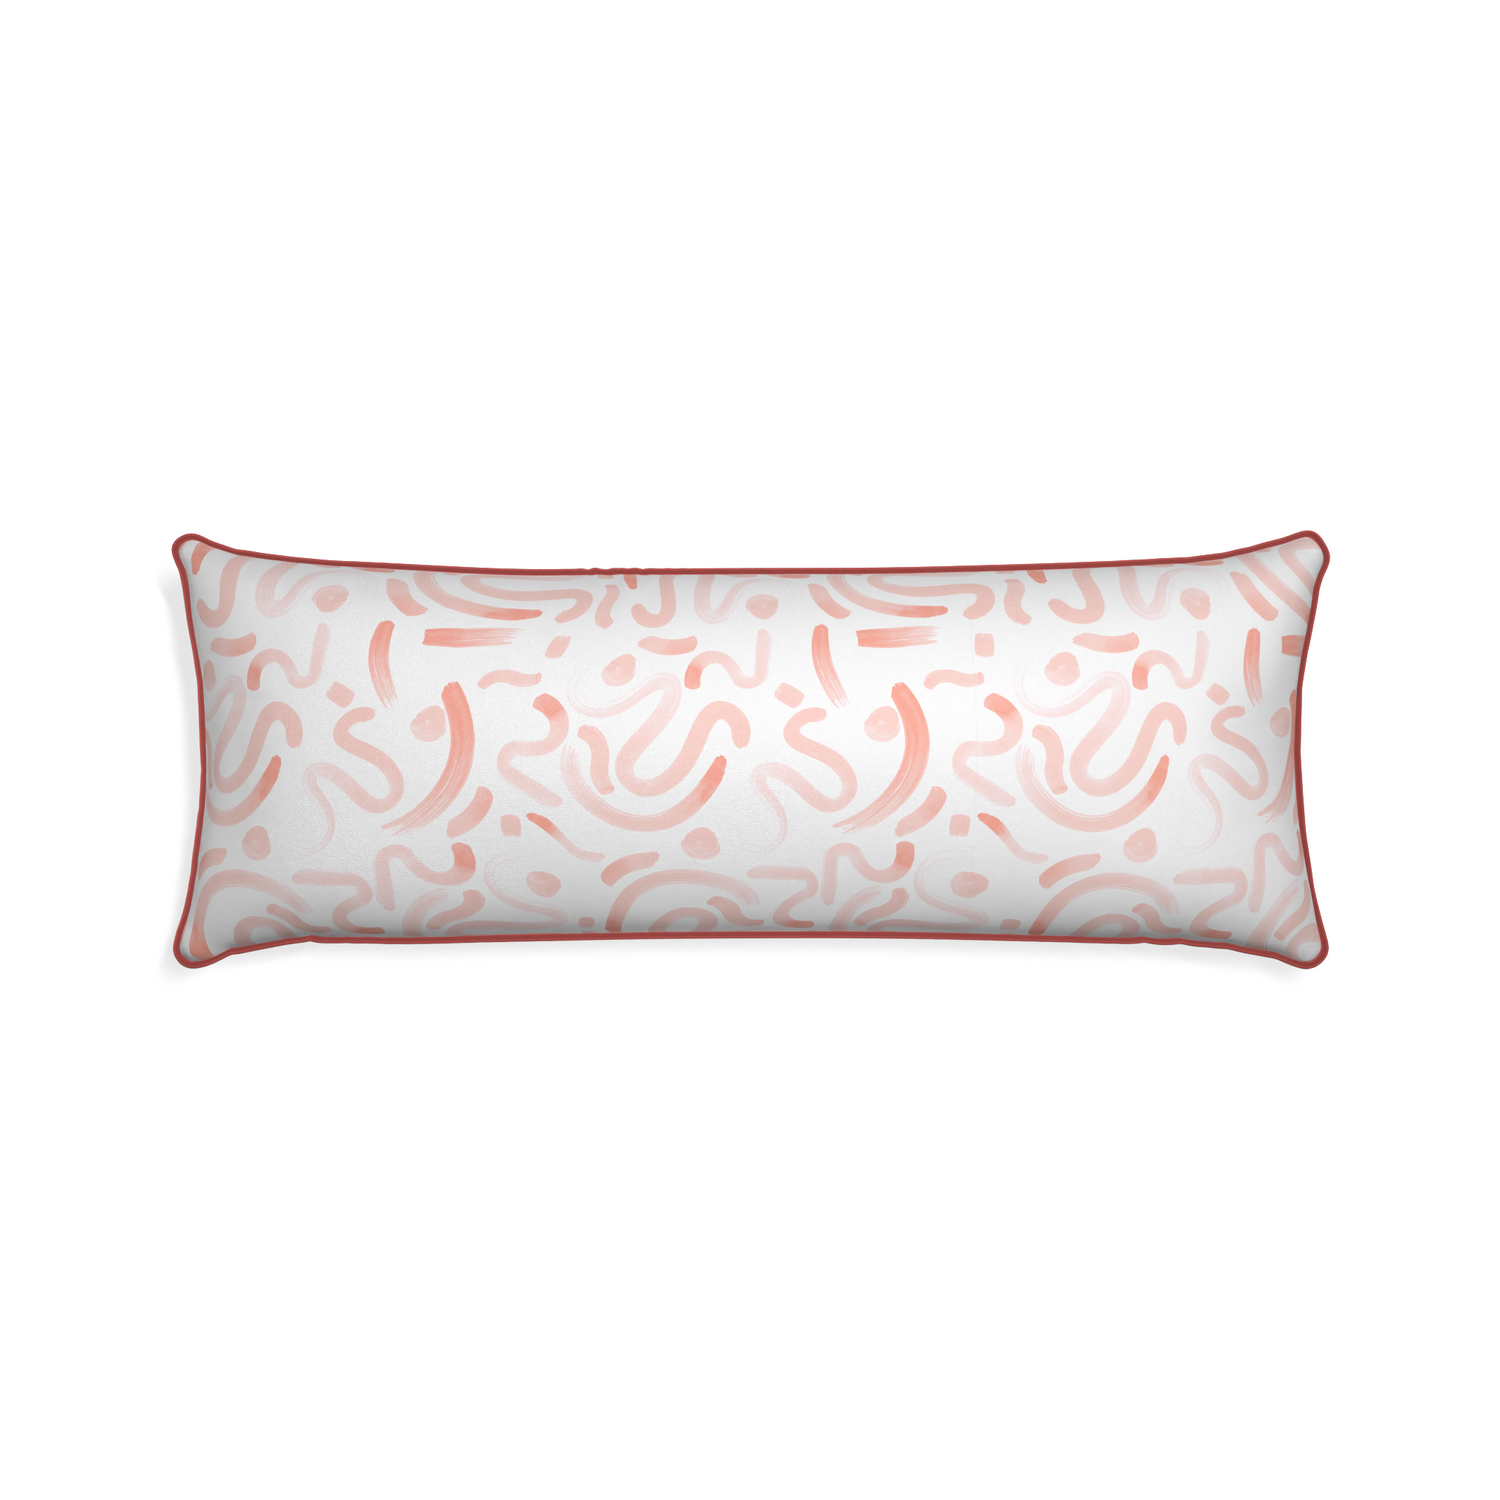 Xl-lumbar hockney pink custom pillow with c piping on white background